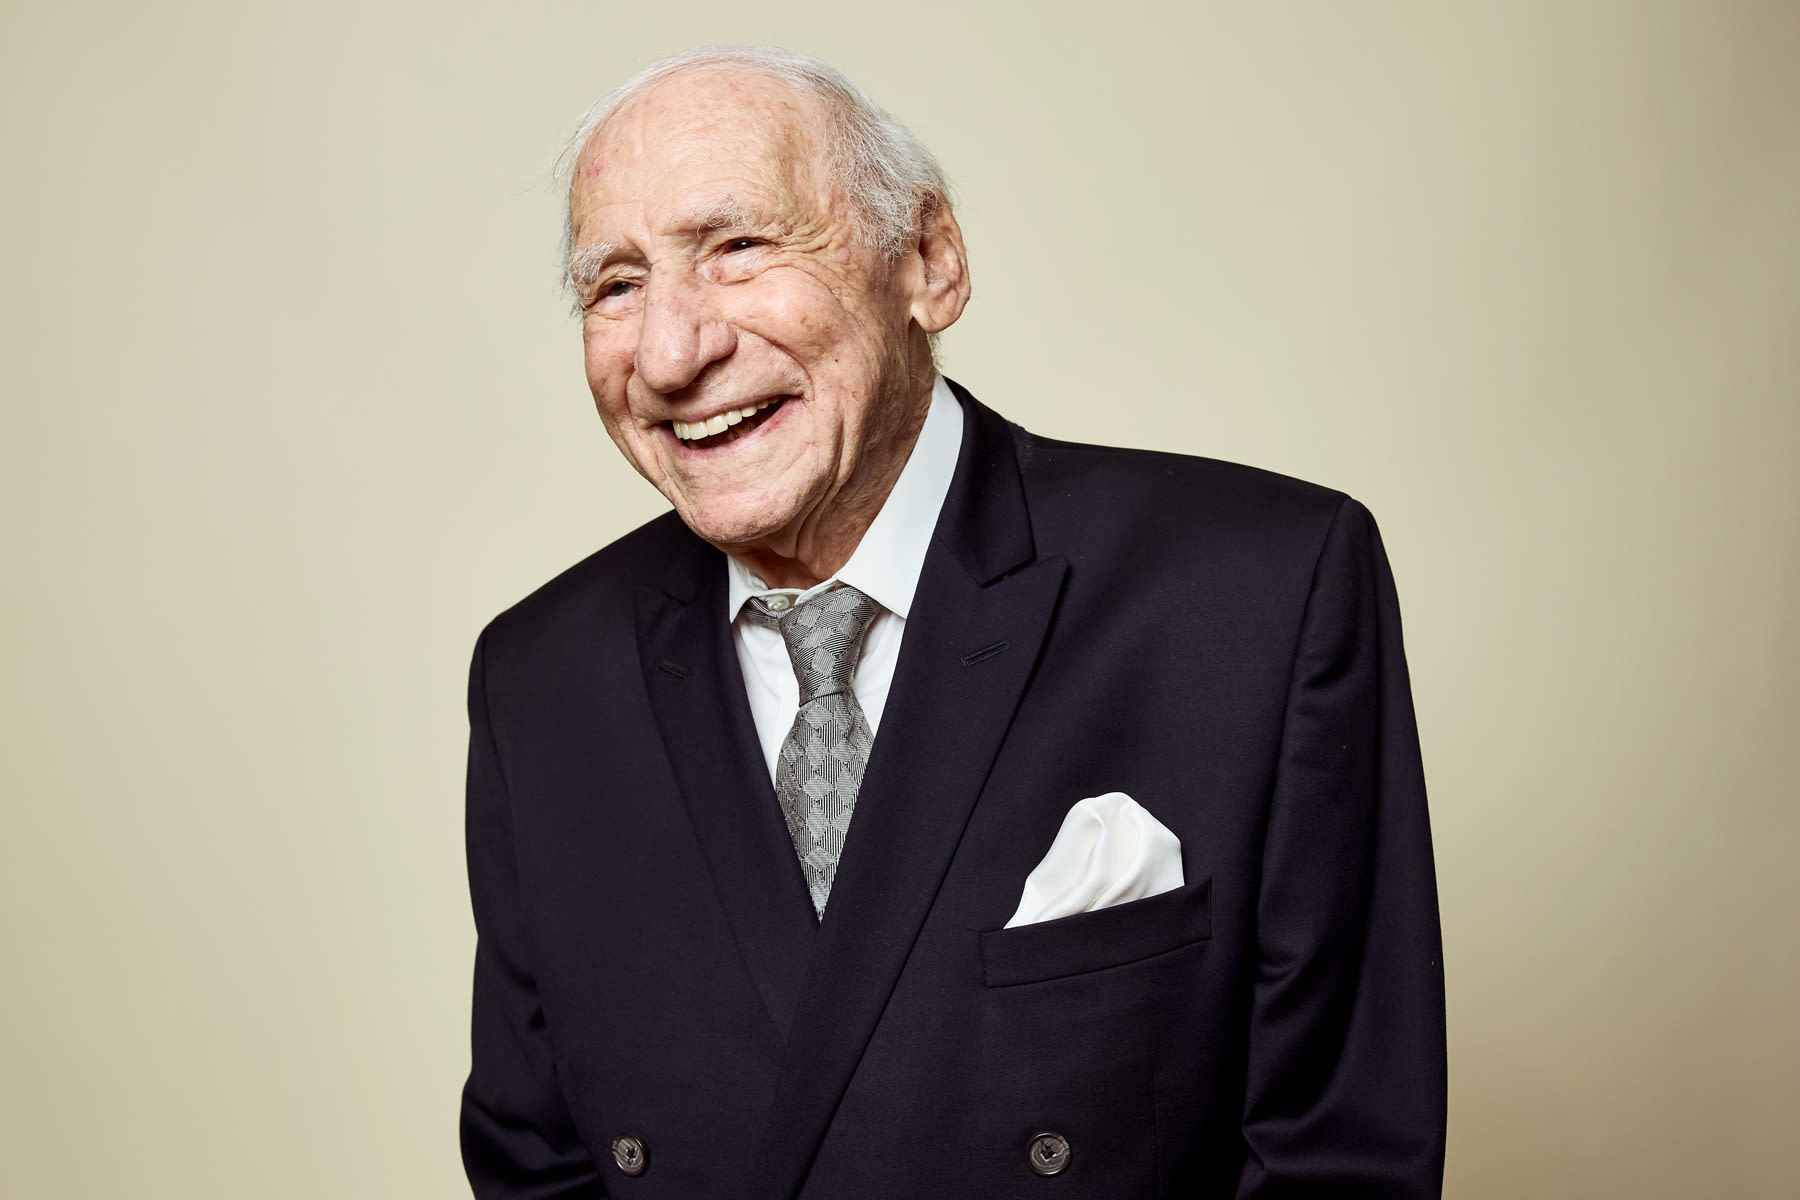 Mel Brooks Doc in the Works From Judd Apatow